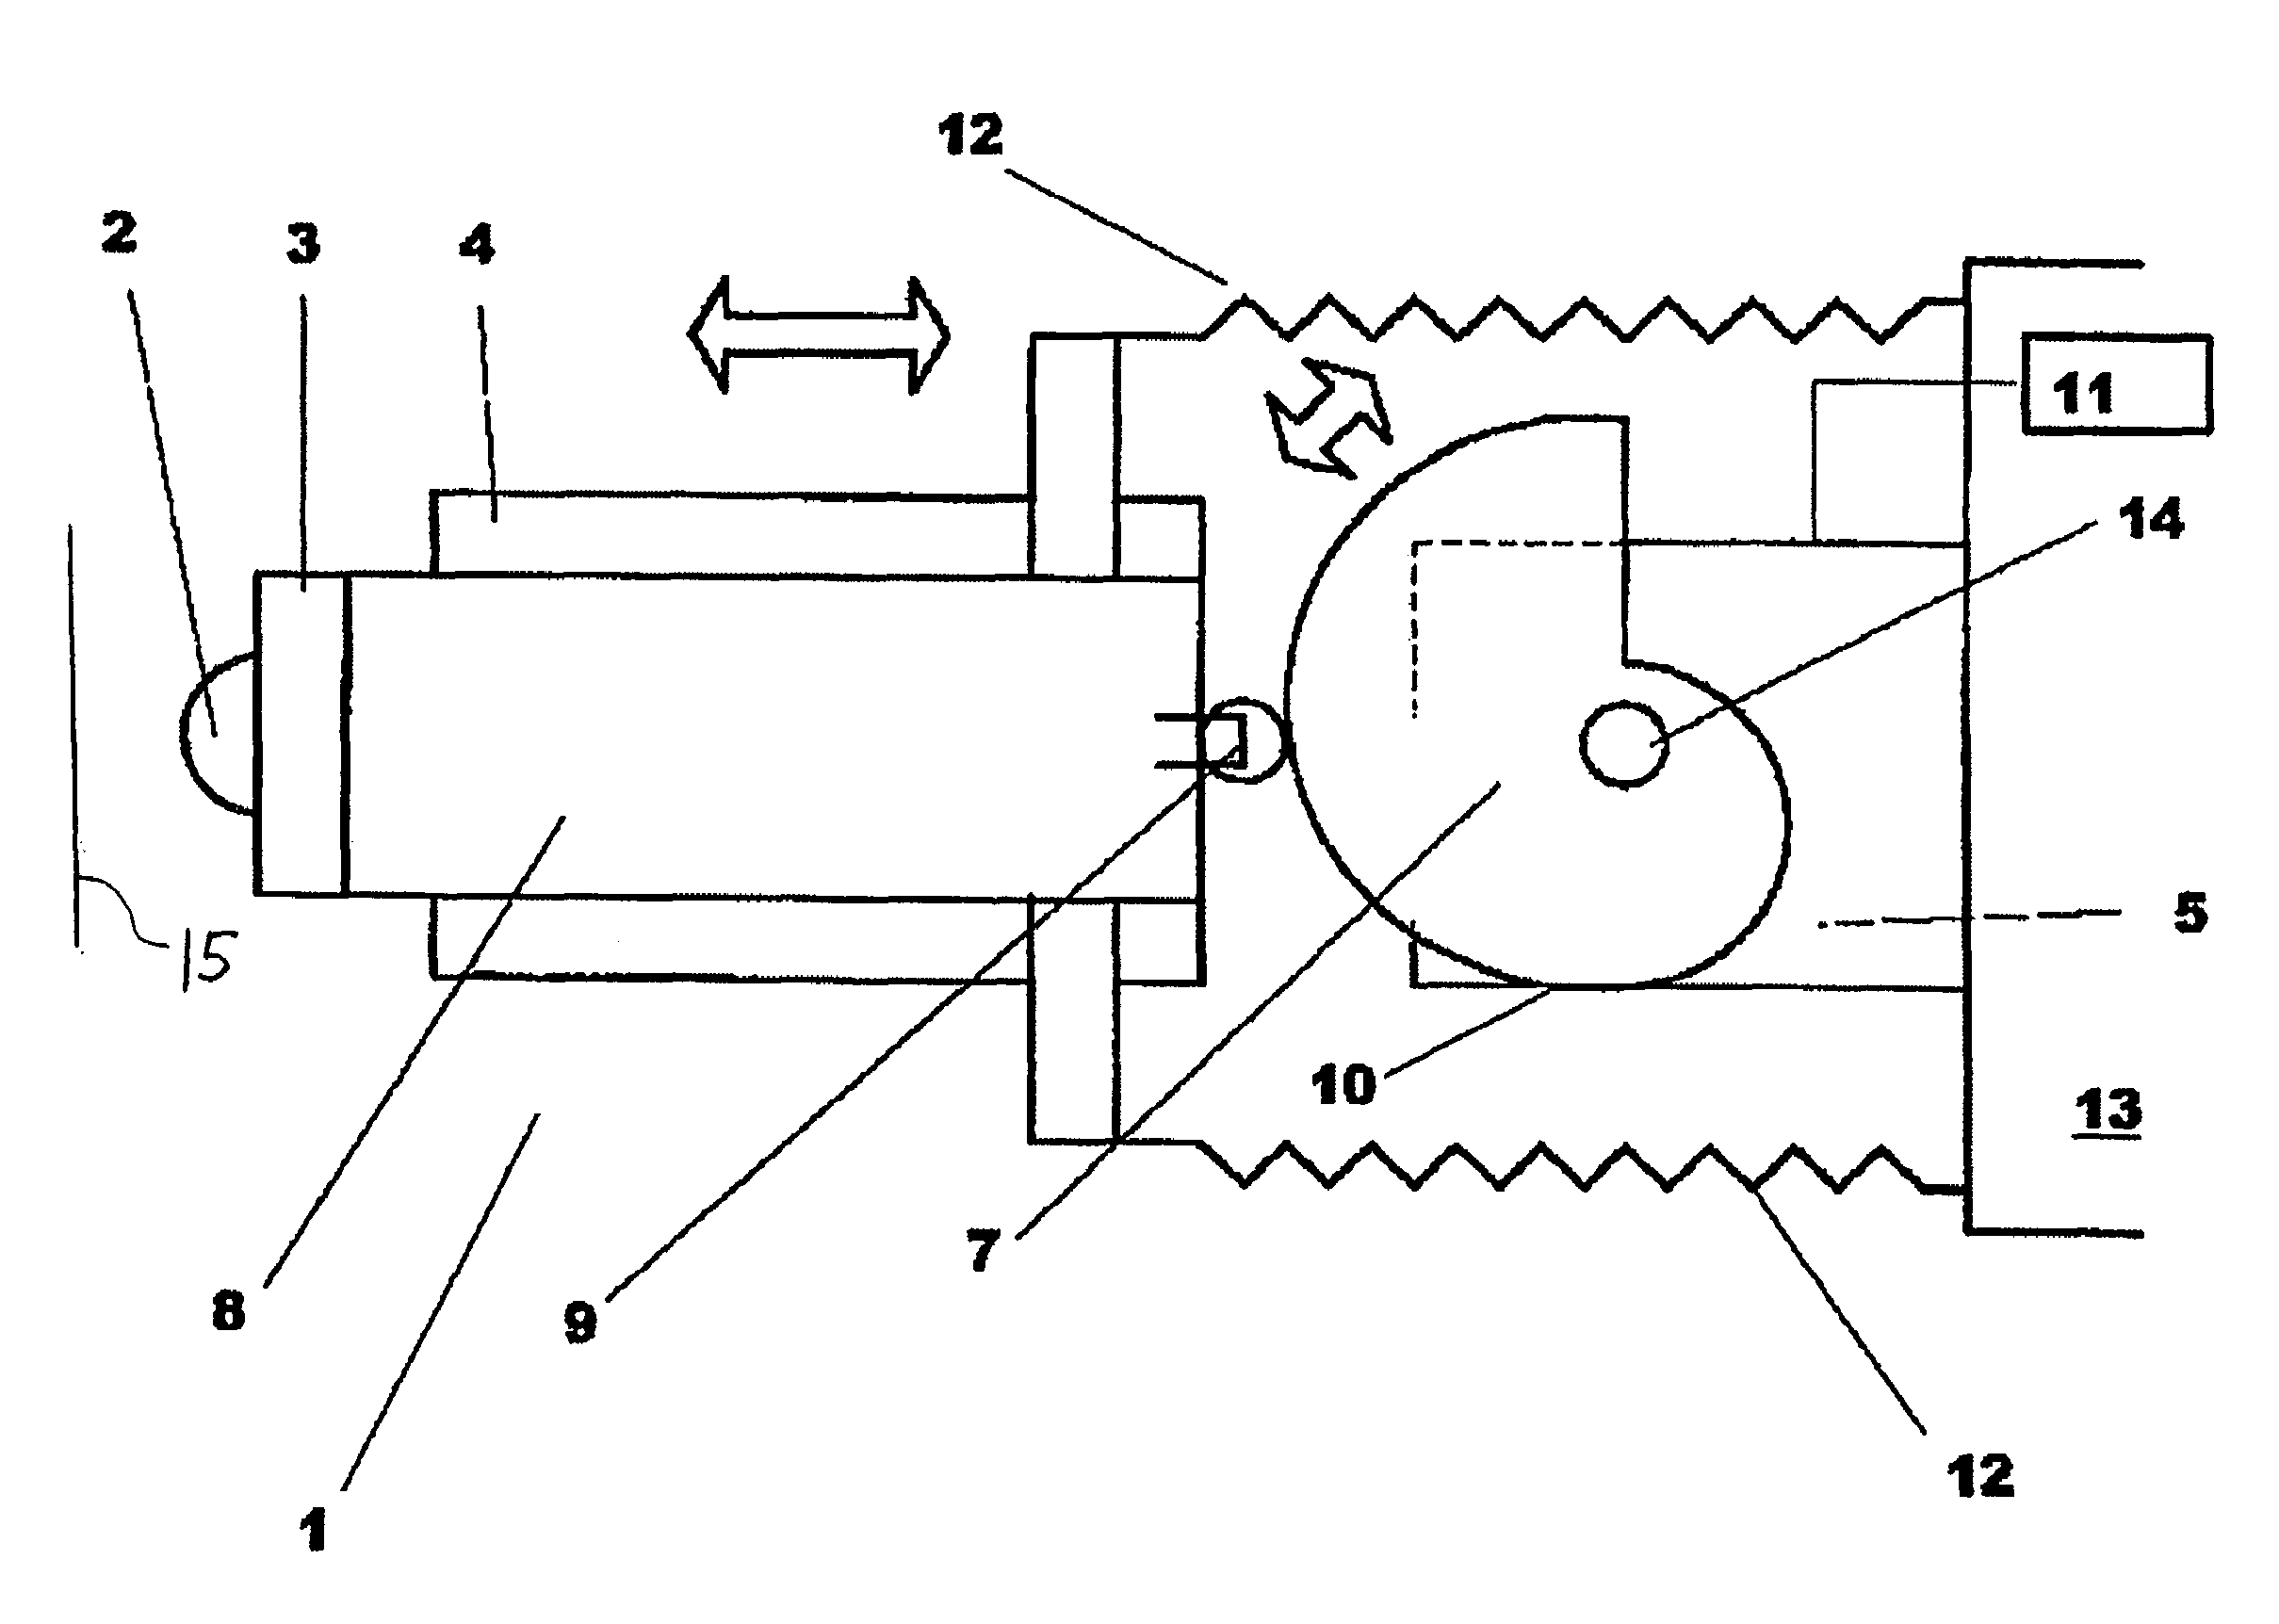 Feeding mechanism for a microtome